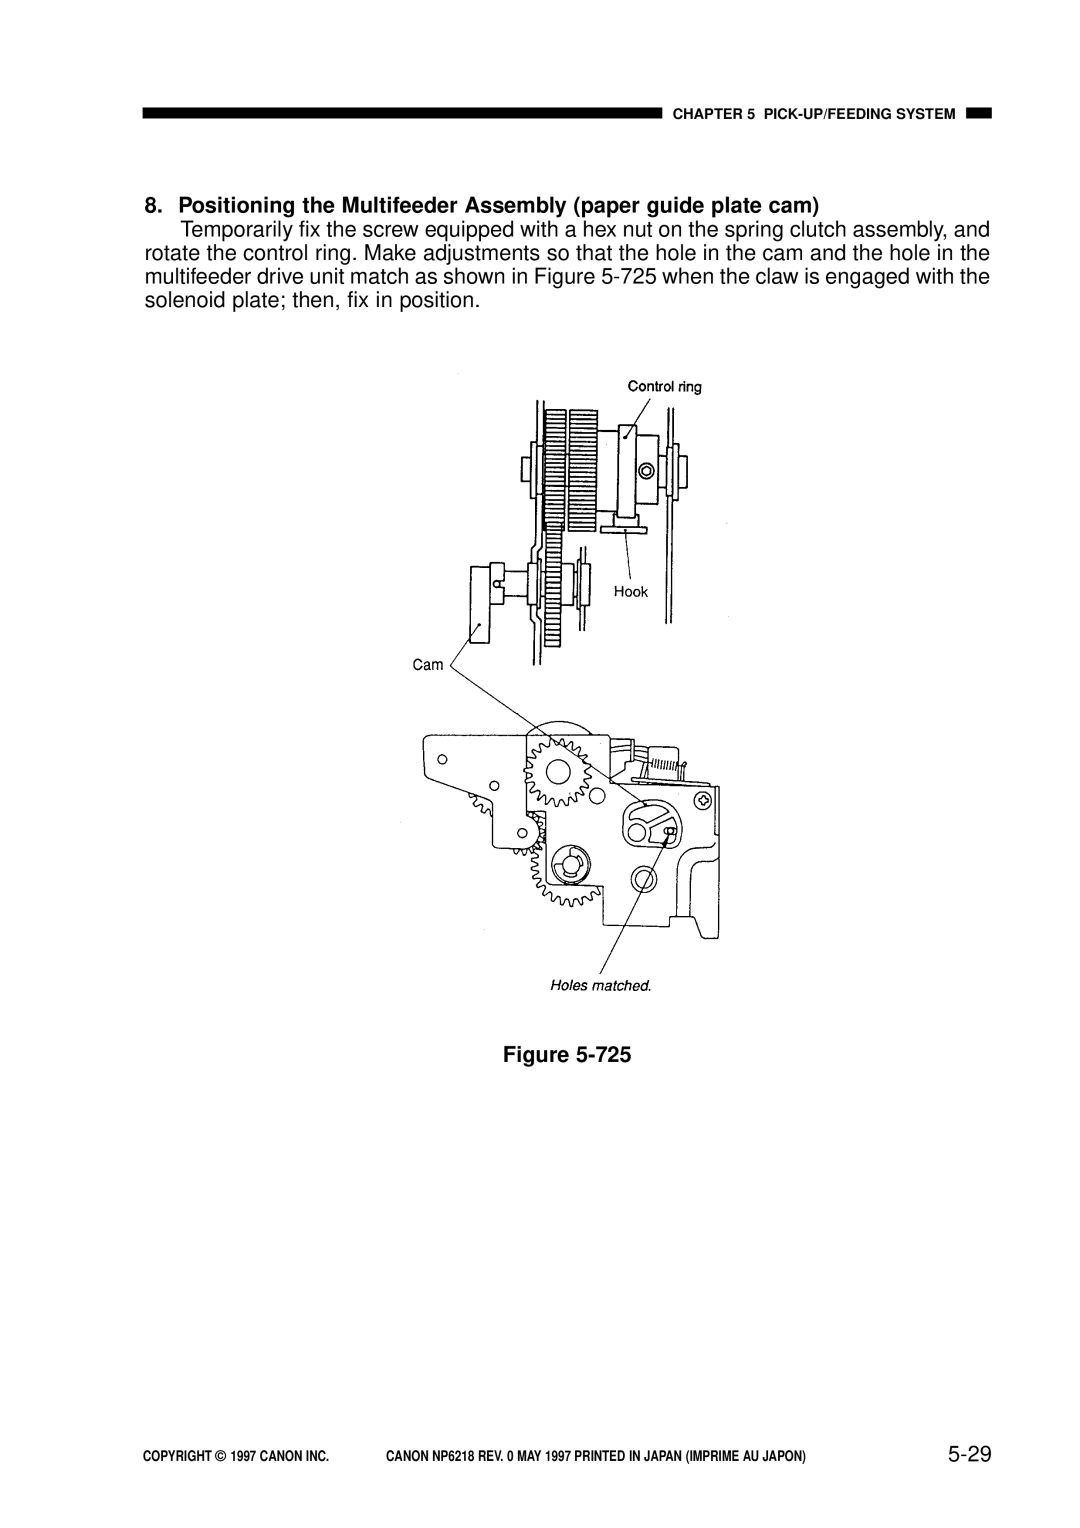 Canon NP6218, FY8-13EX-000 service manual Positioning the Multifeeder Assembly paper guide plate cam, 5-29 